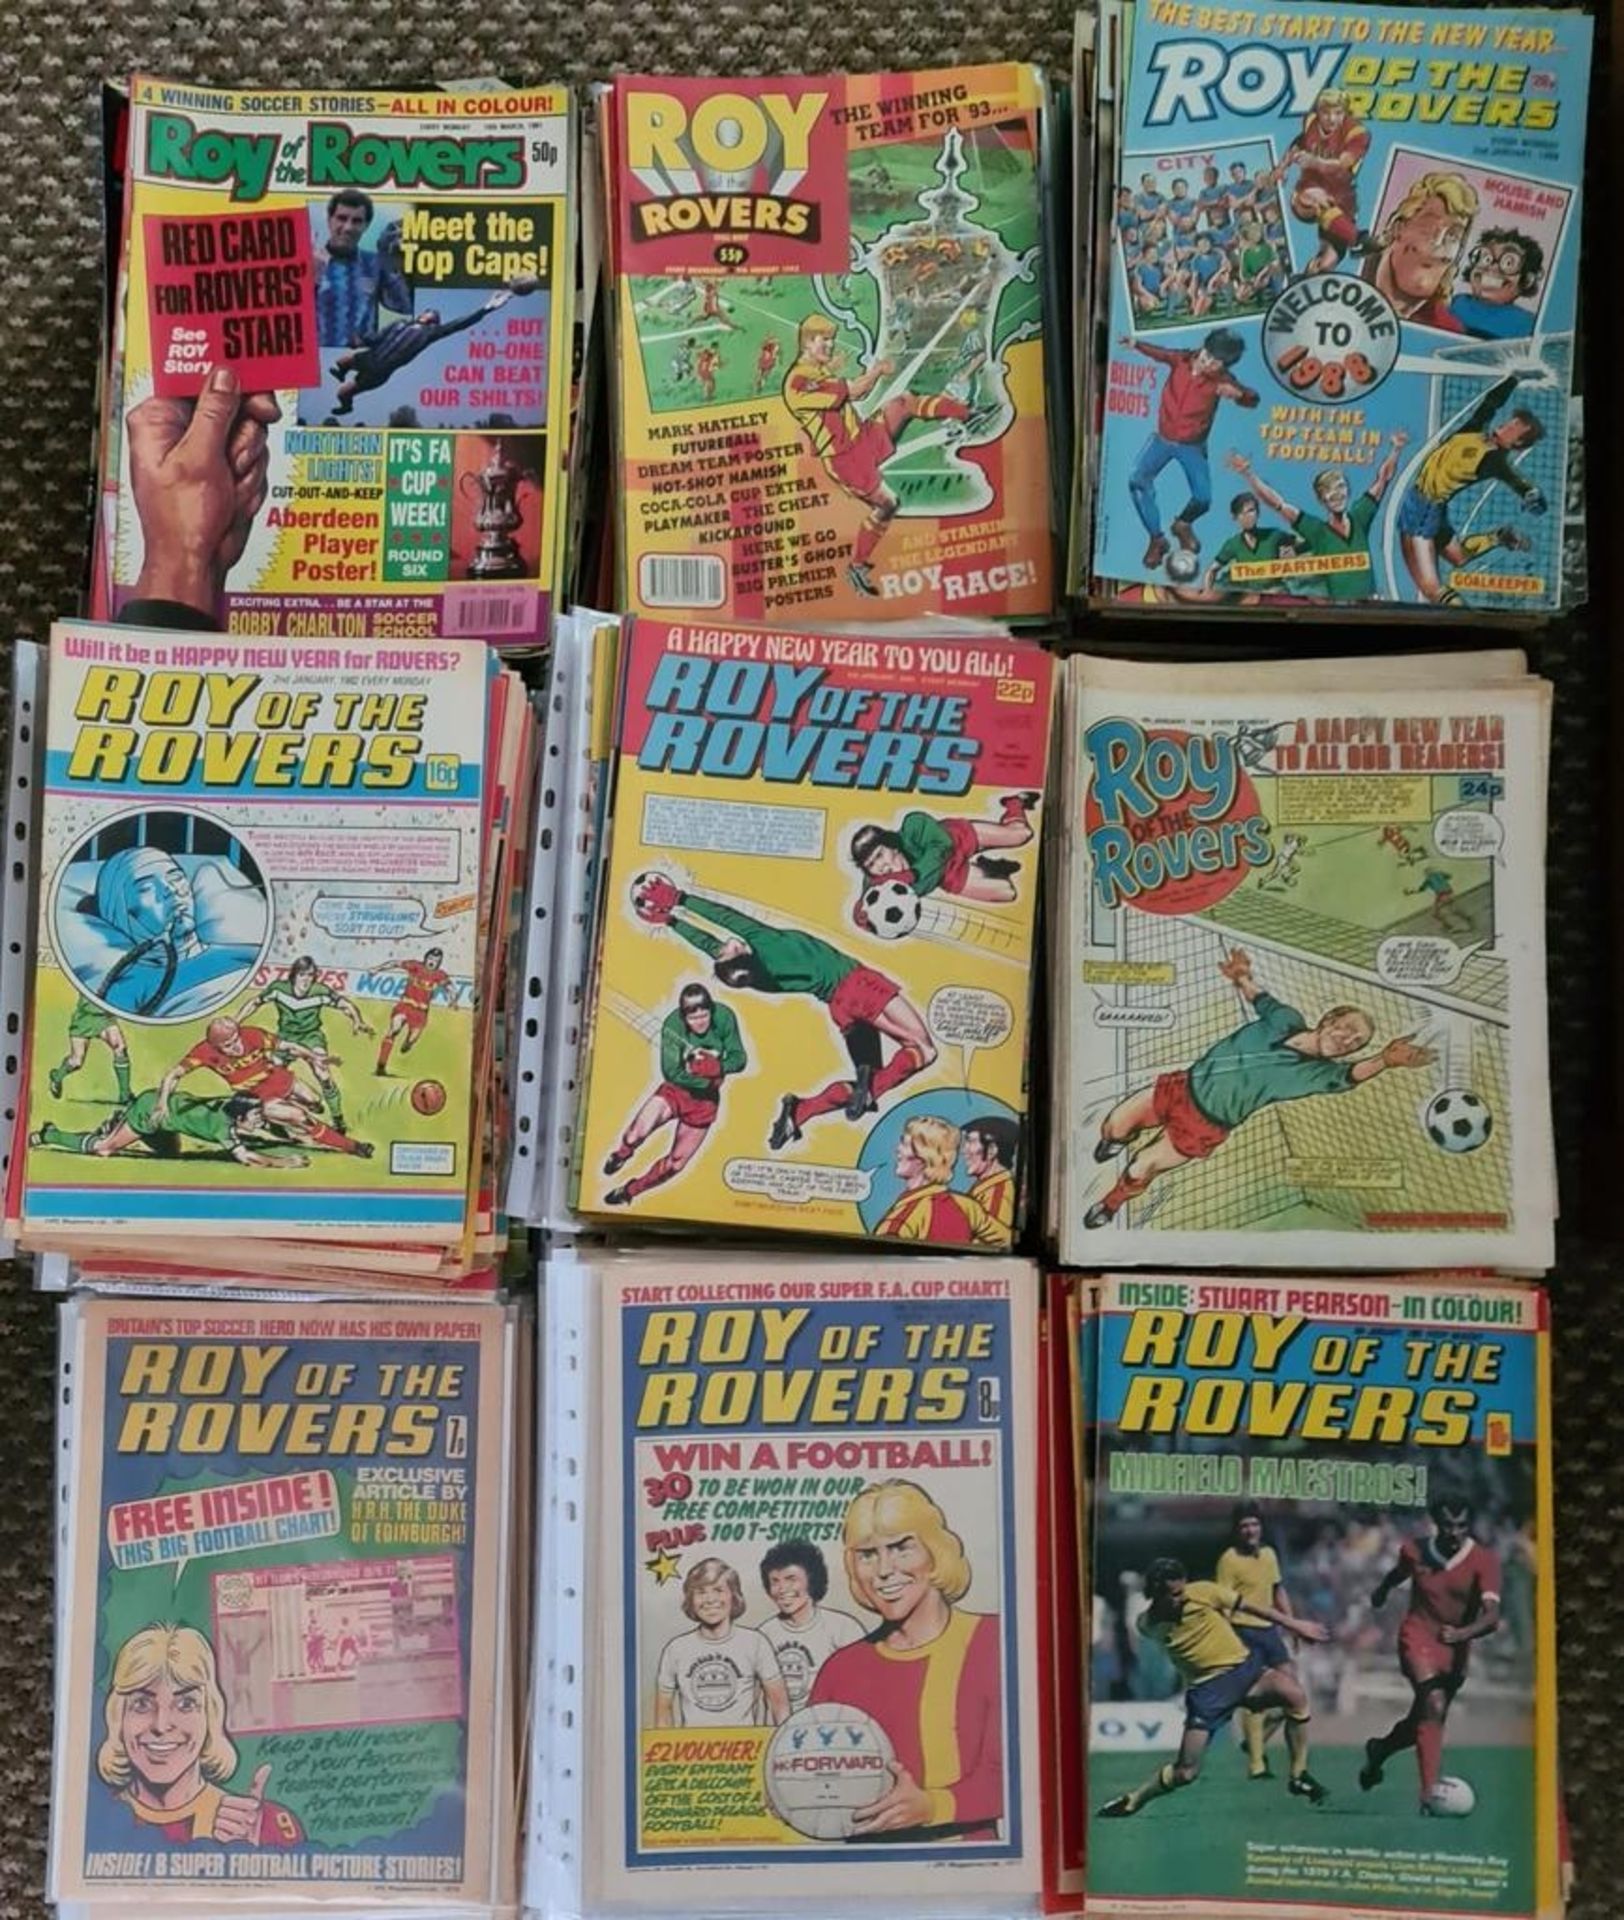 A Supreme Roy of the Rovers Comic Book Collection! Every edition from 1976 - 1995. There are 860